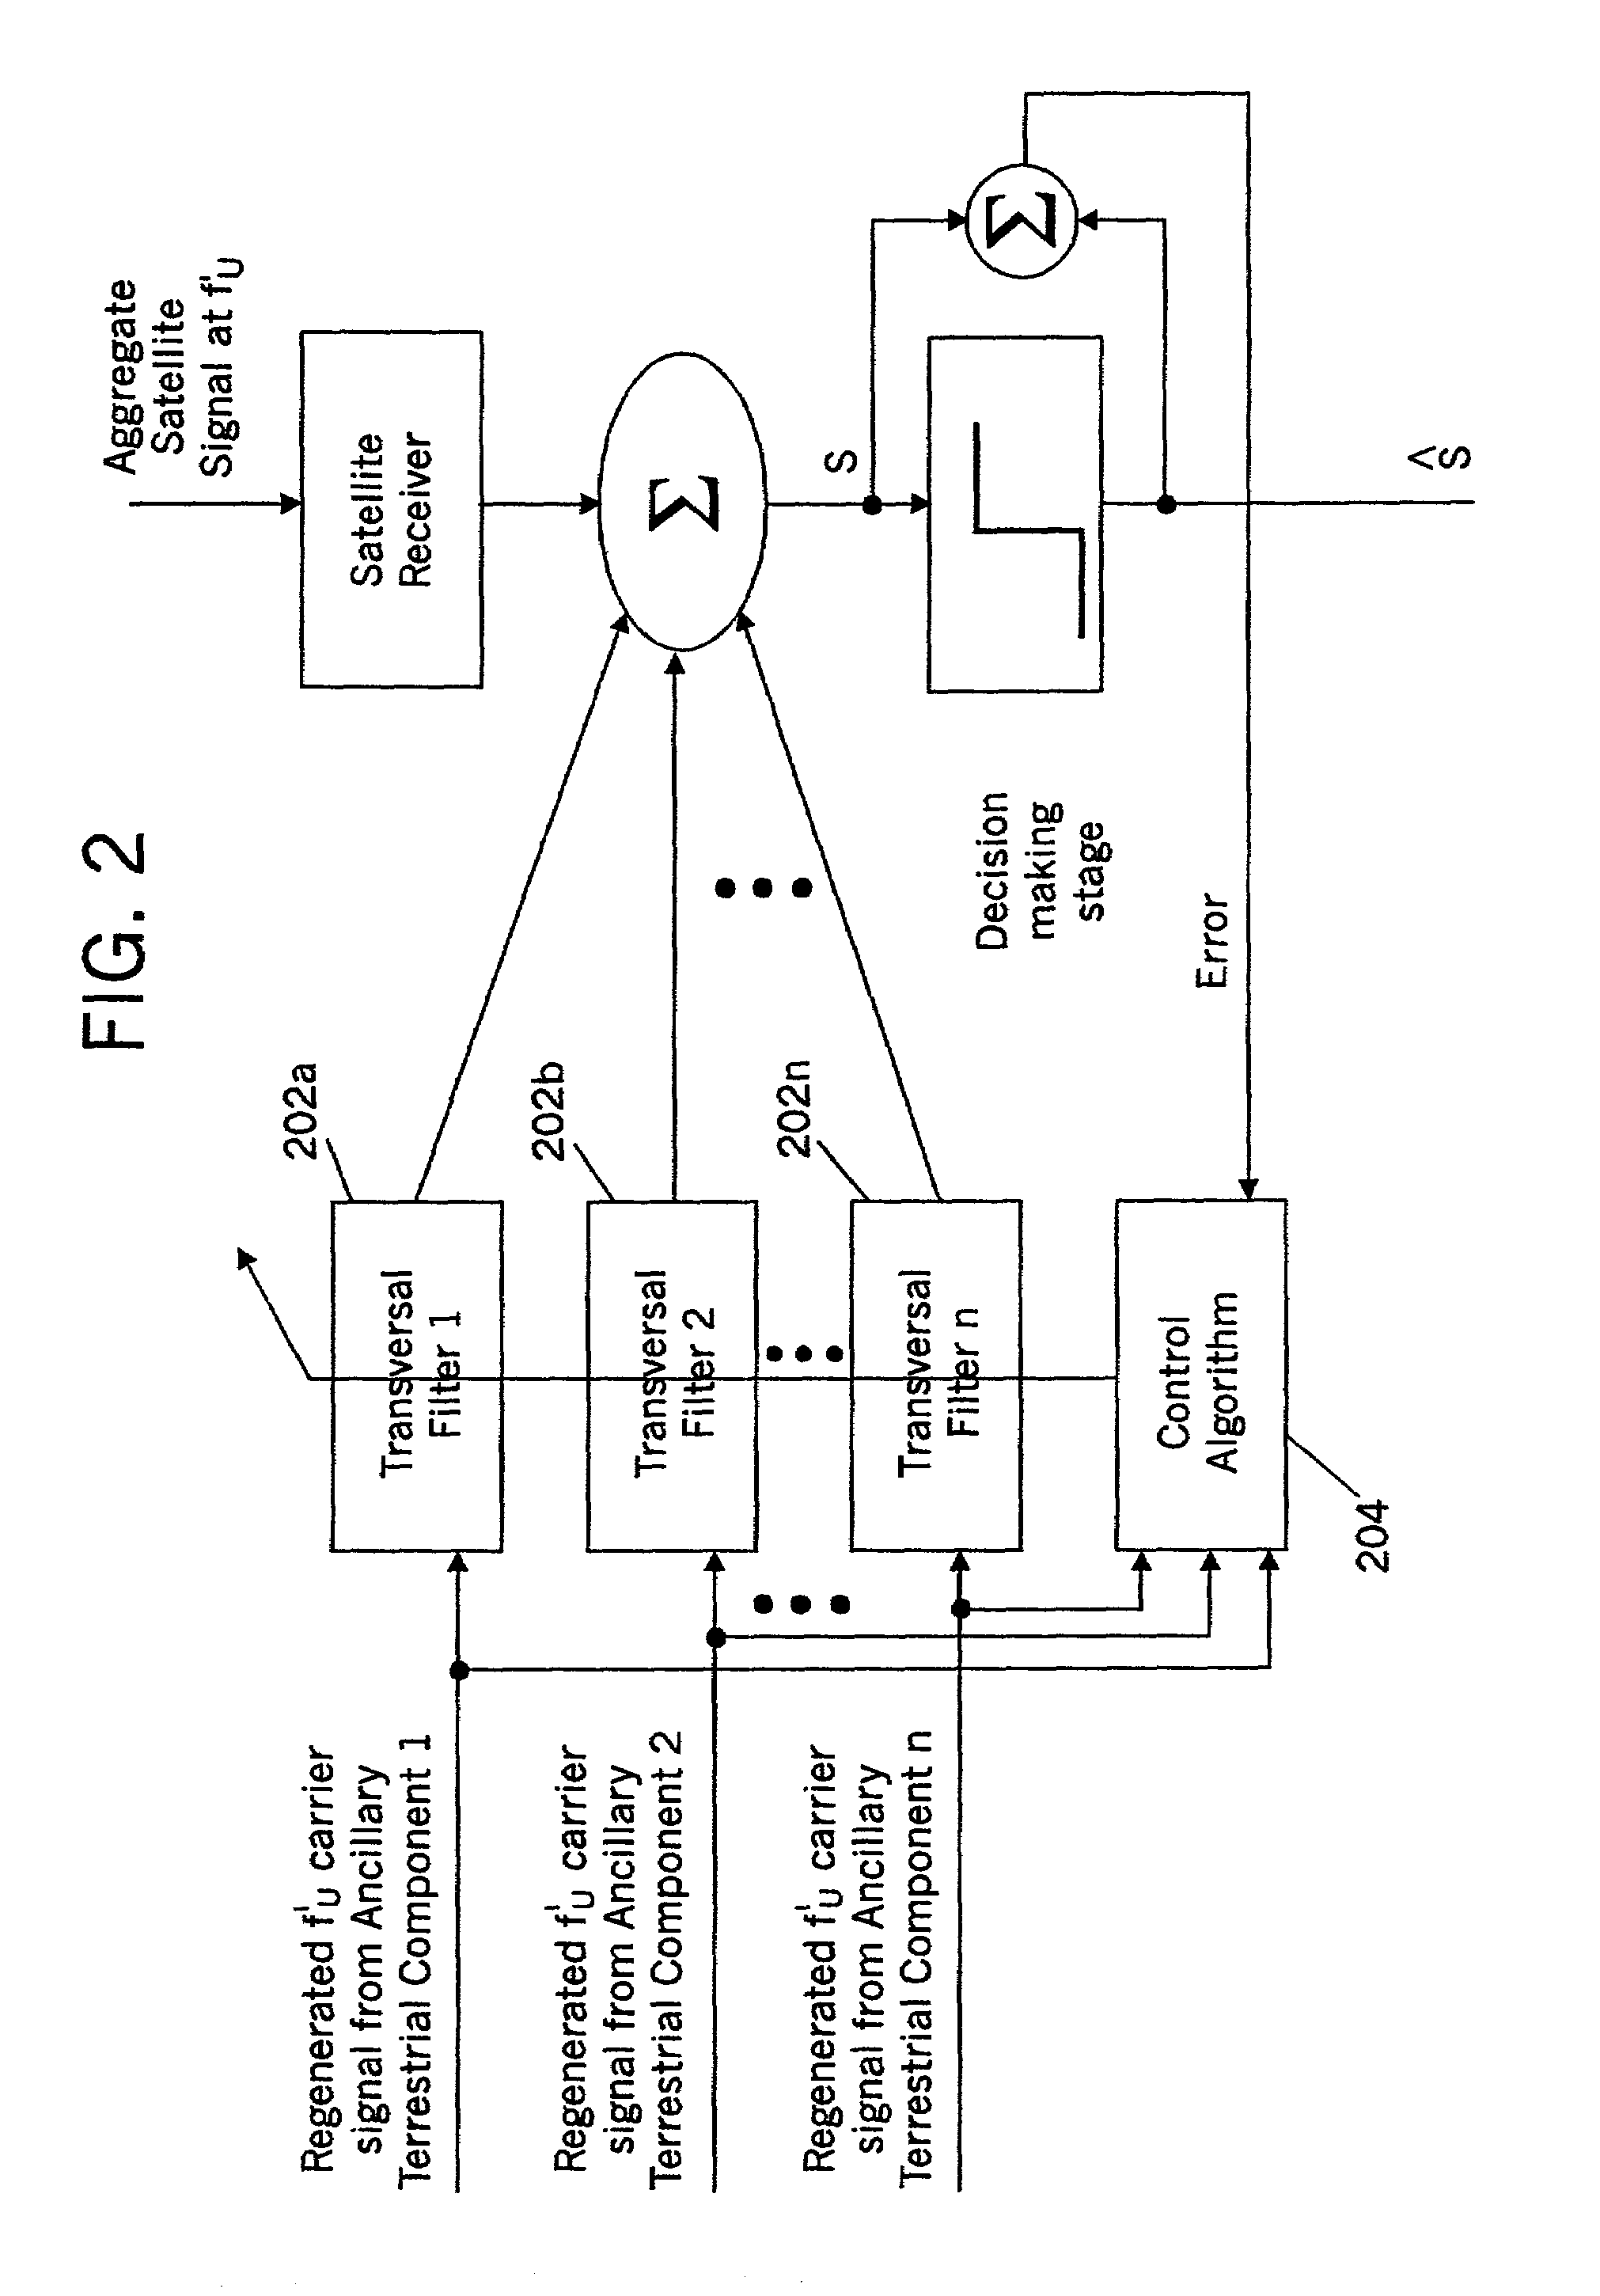 Systems and methods for monitoring terrestrially reused satellite frequencies to reduce potential interference